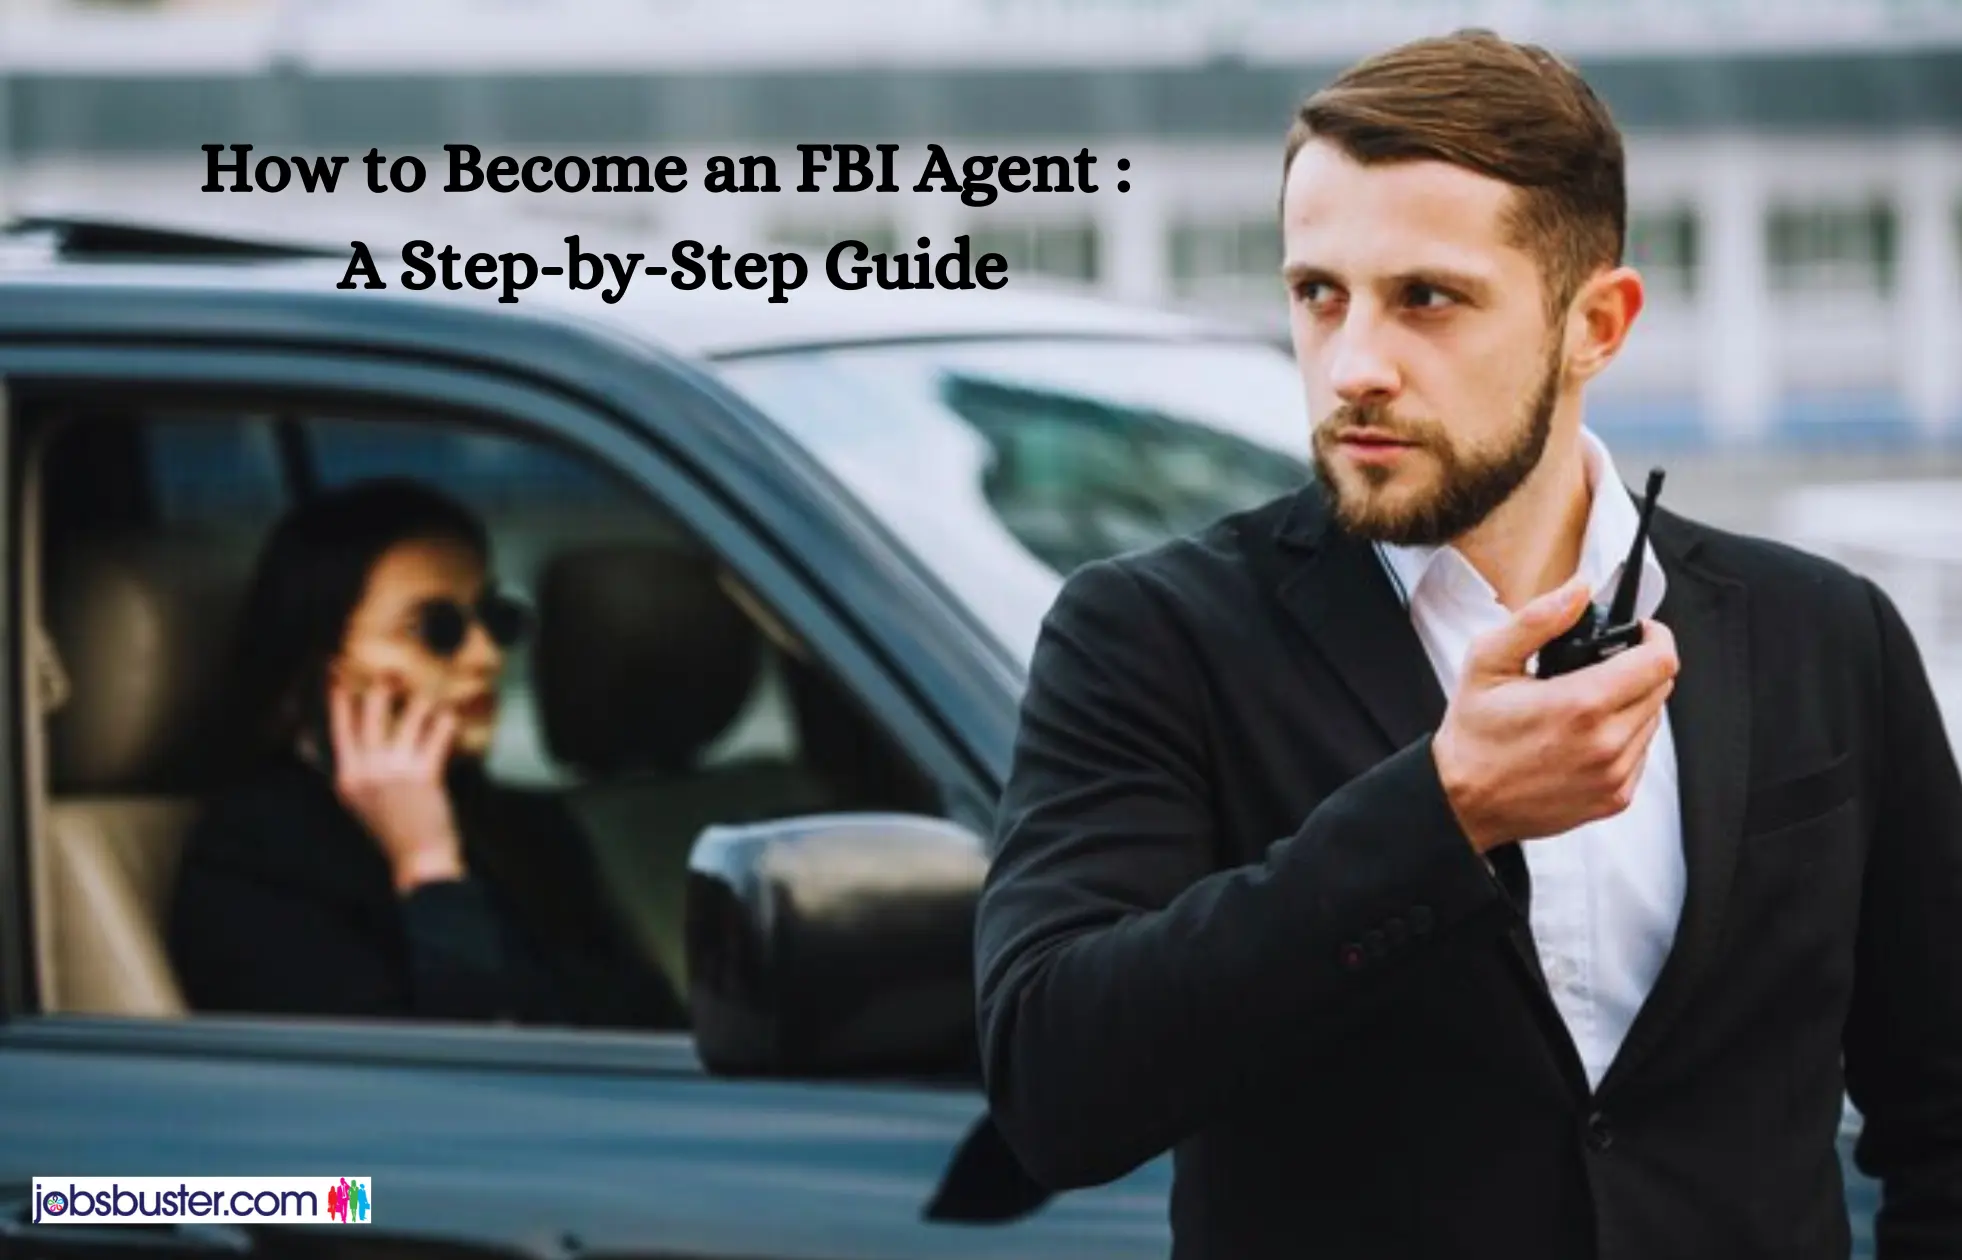 How to Become an FBI Agent : A Step-by-Step Guide